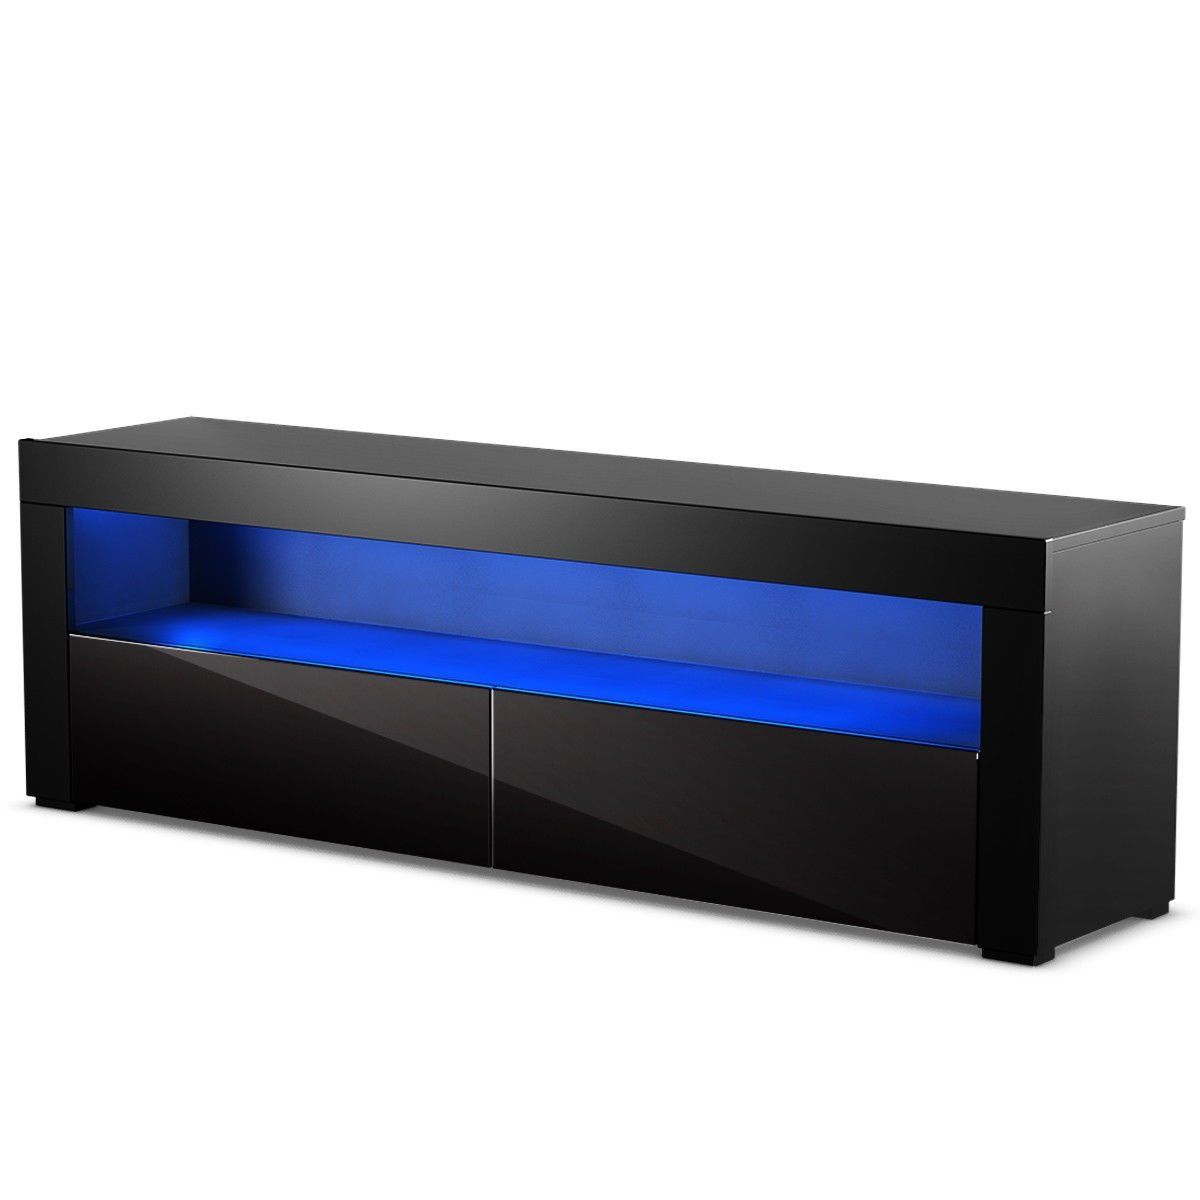 Fashionable Black Gloss Tv Benches Within Shop Costway High Gloss Tv Stand Unit Cabinet Console Furniture W (View 17 of 20)